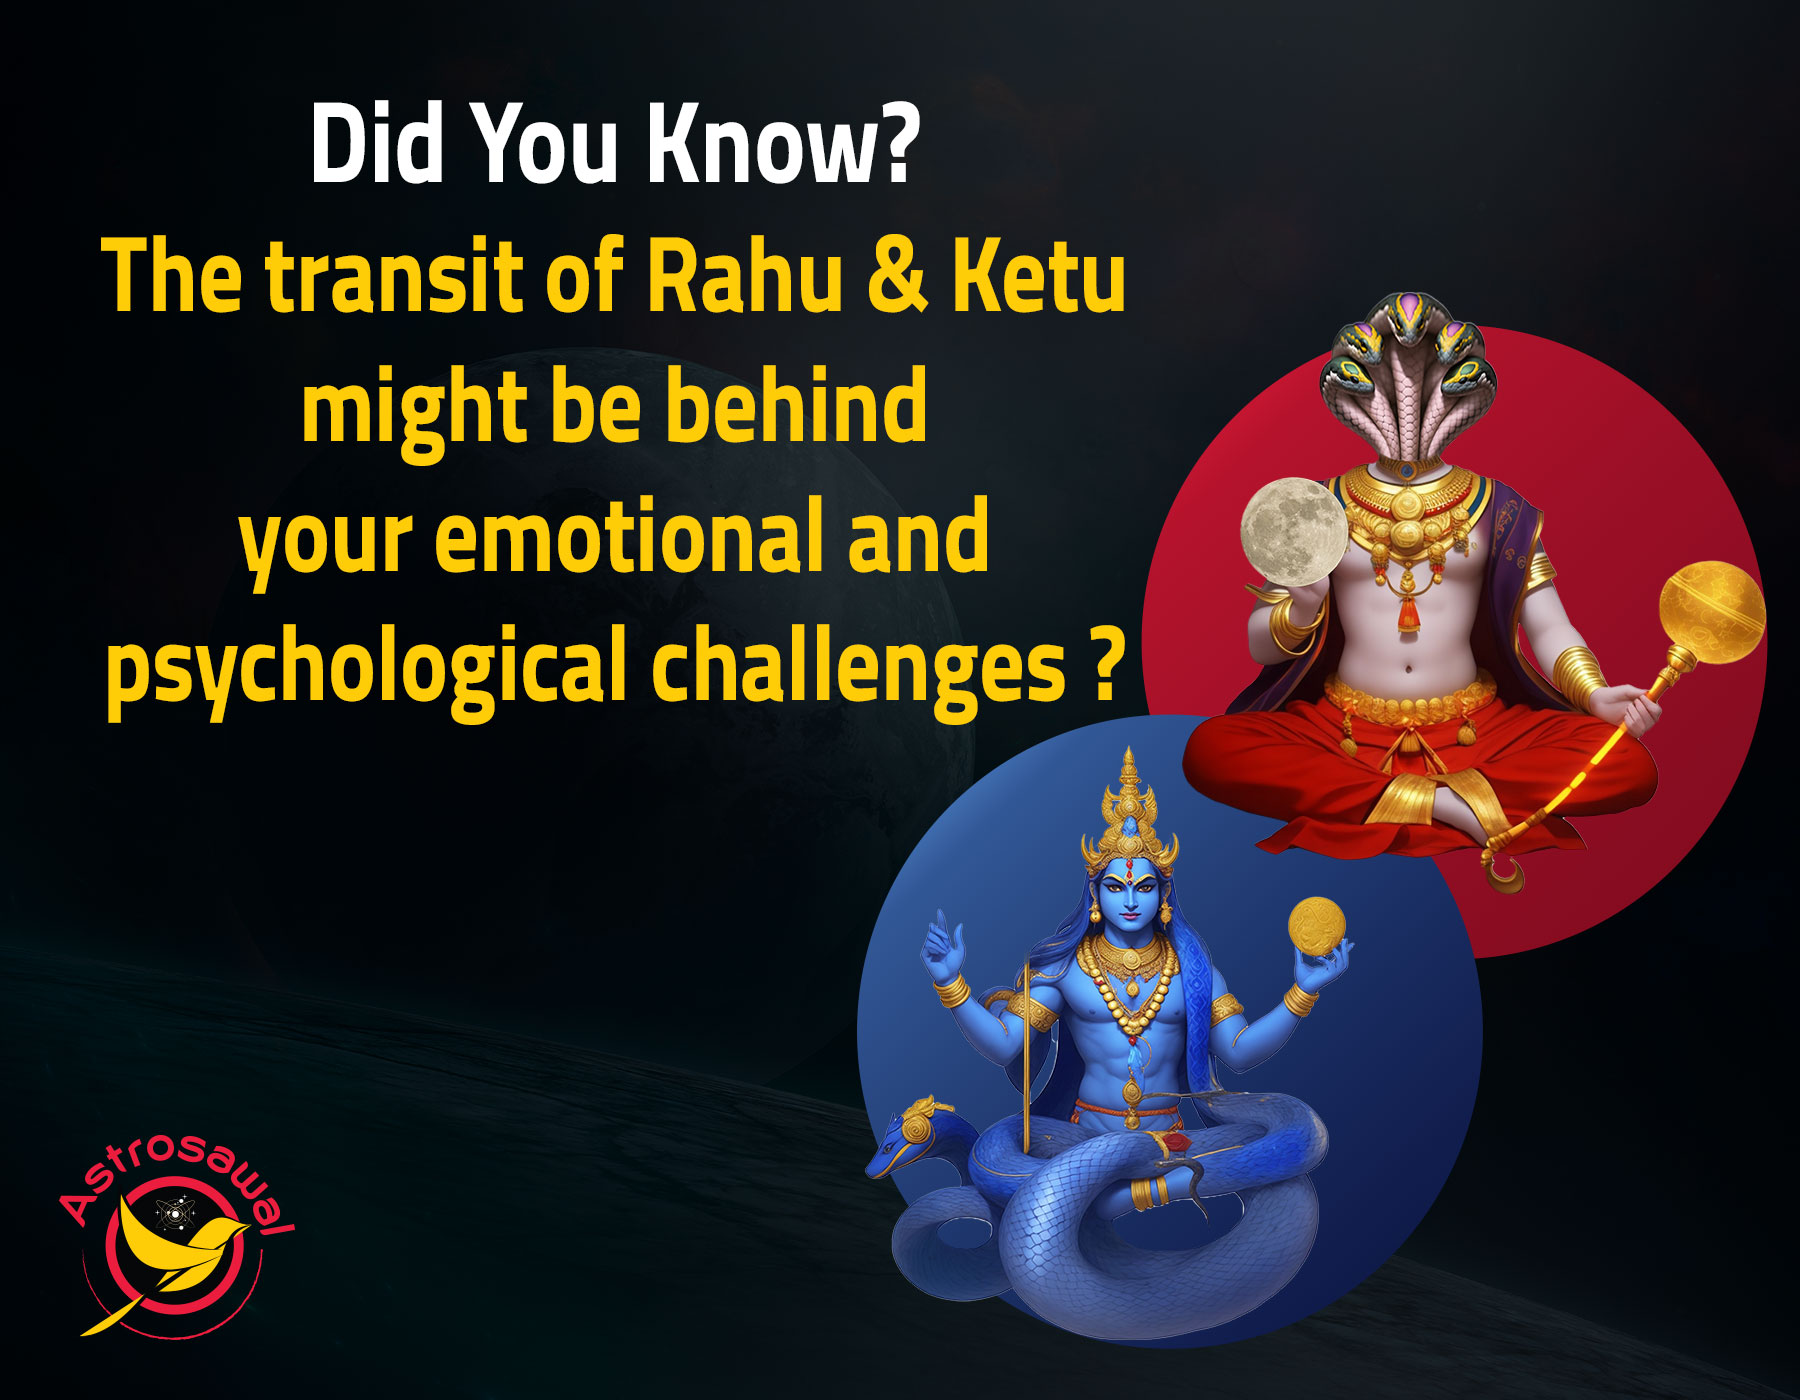 The transit of Rahu and Ketu might be behind your emotional and psychological challenges